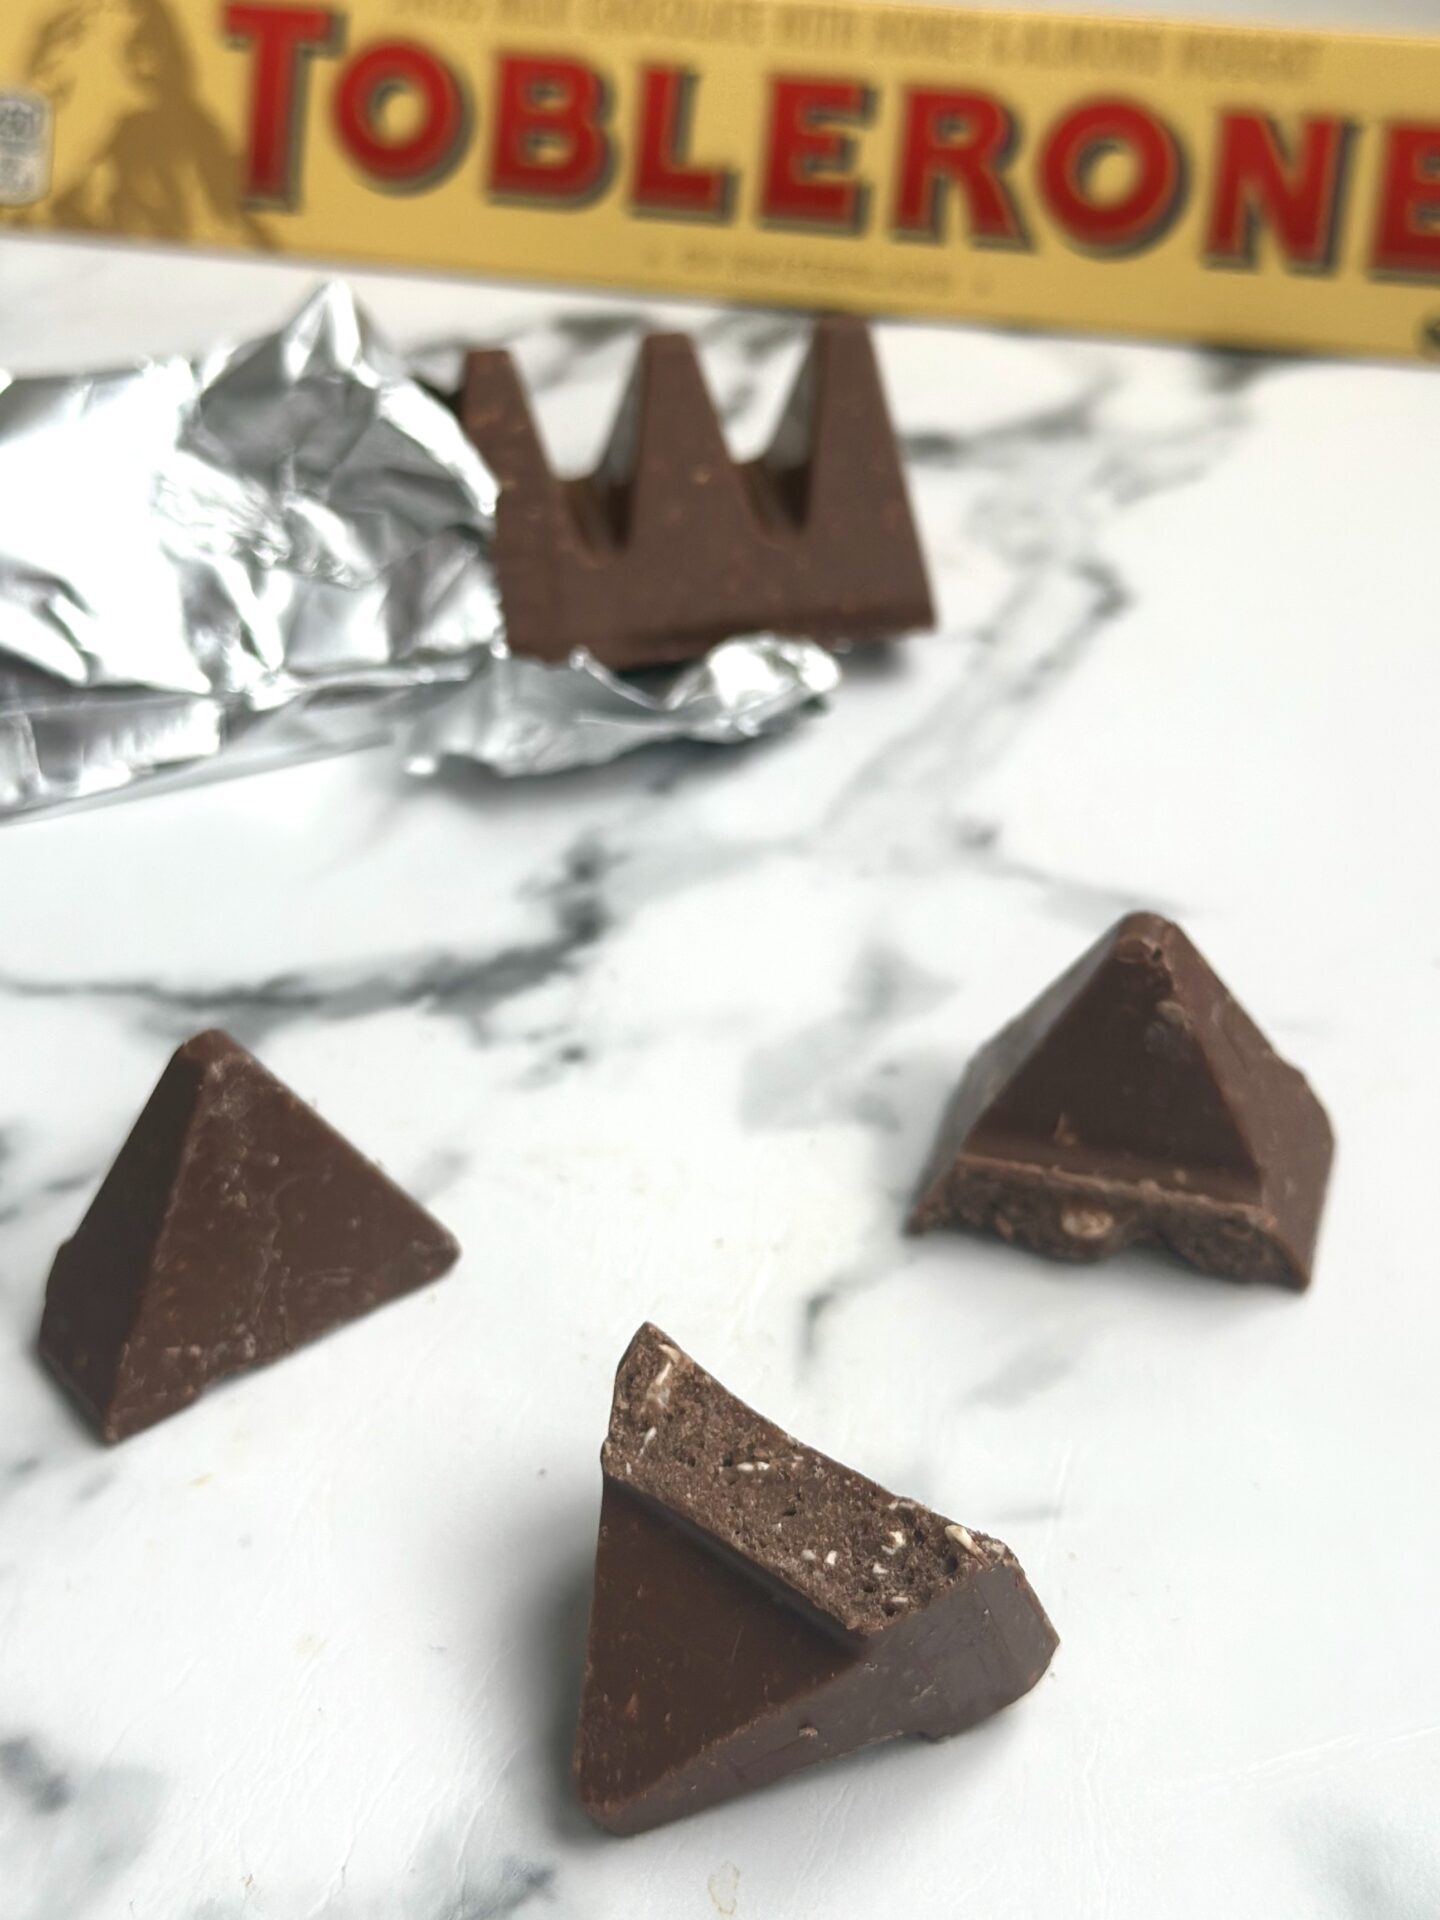 Toblerone chocolate is seen in the package, as a whole bar and broken into pieces